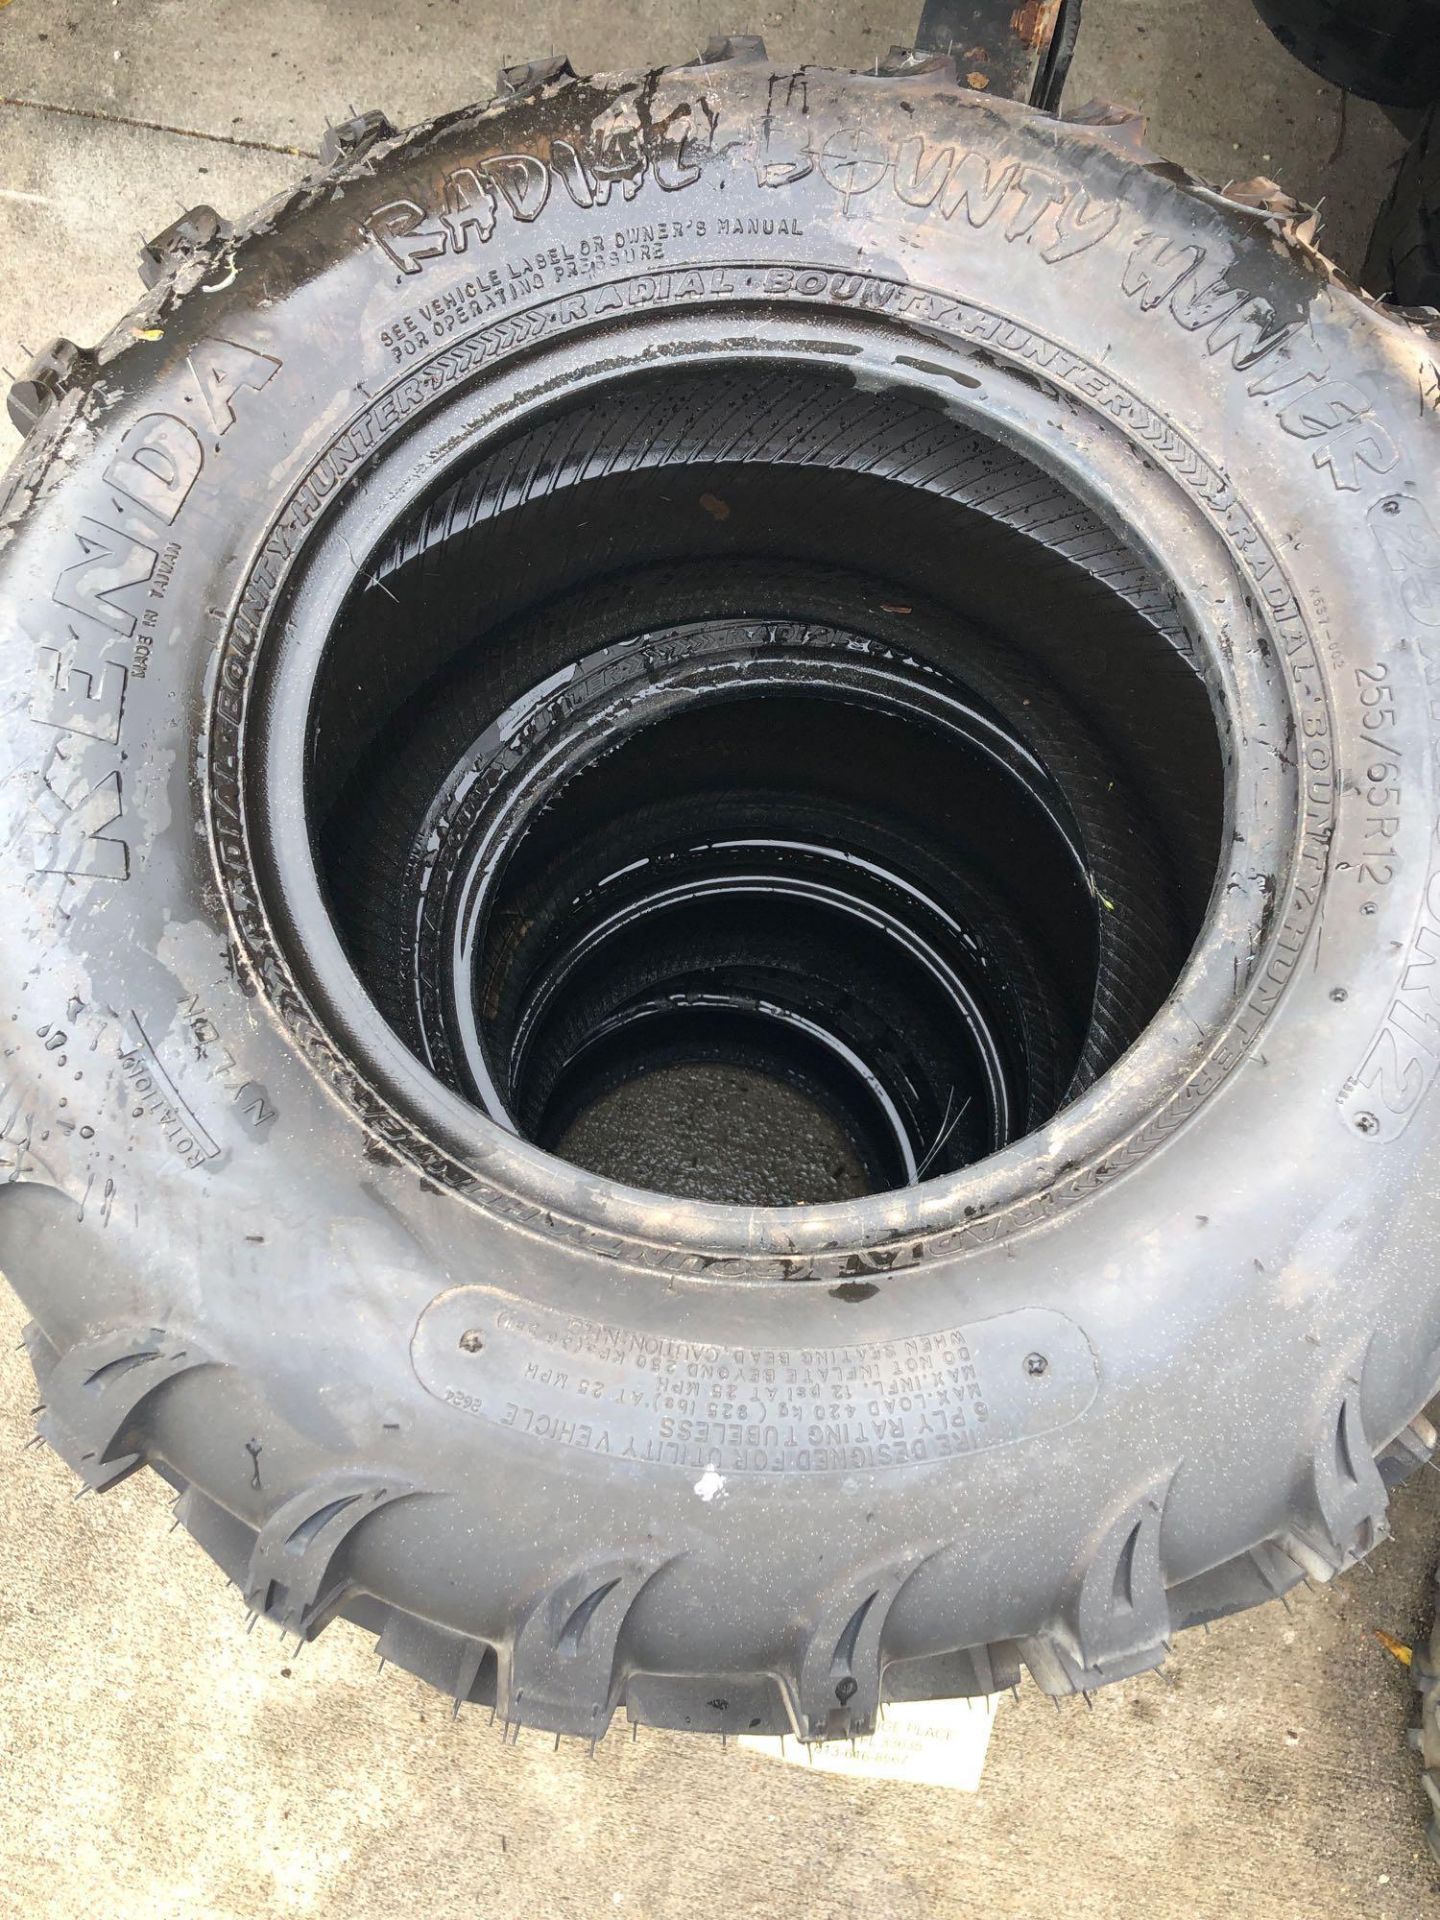 SET OF NEW TIRES 25 x 10R12 - Image 2 of 2